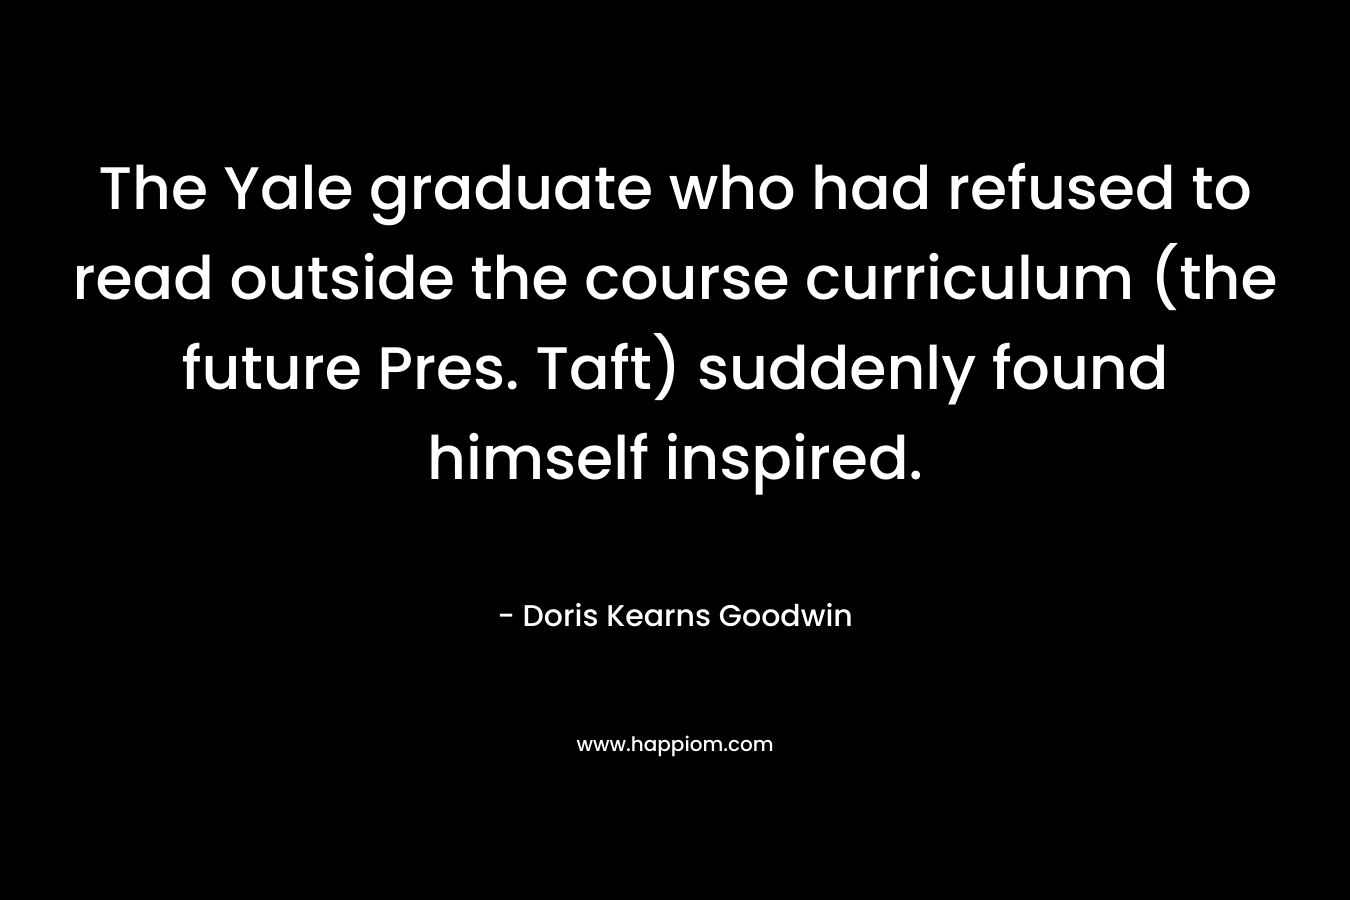 The Yale graduate who had refused to read outside the course curriculum (the future Pres. Taft) suddenly found himself inspired. – Doris Kearns Goodwin